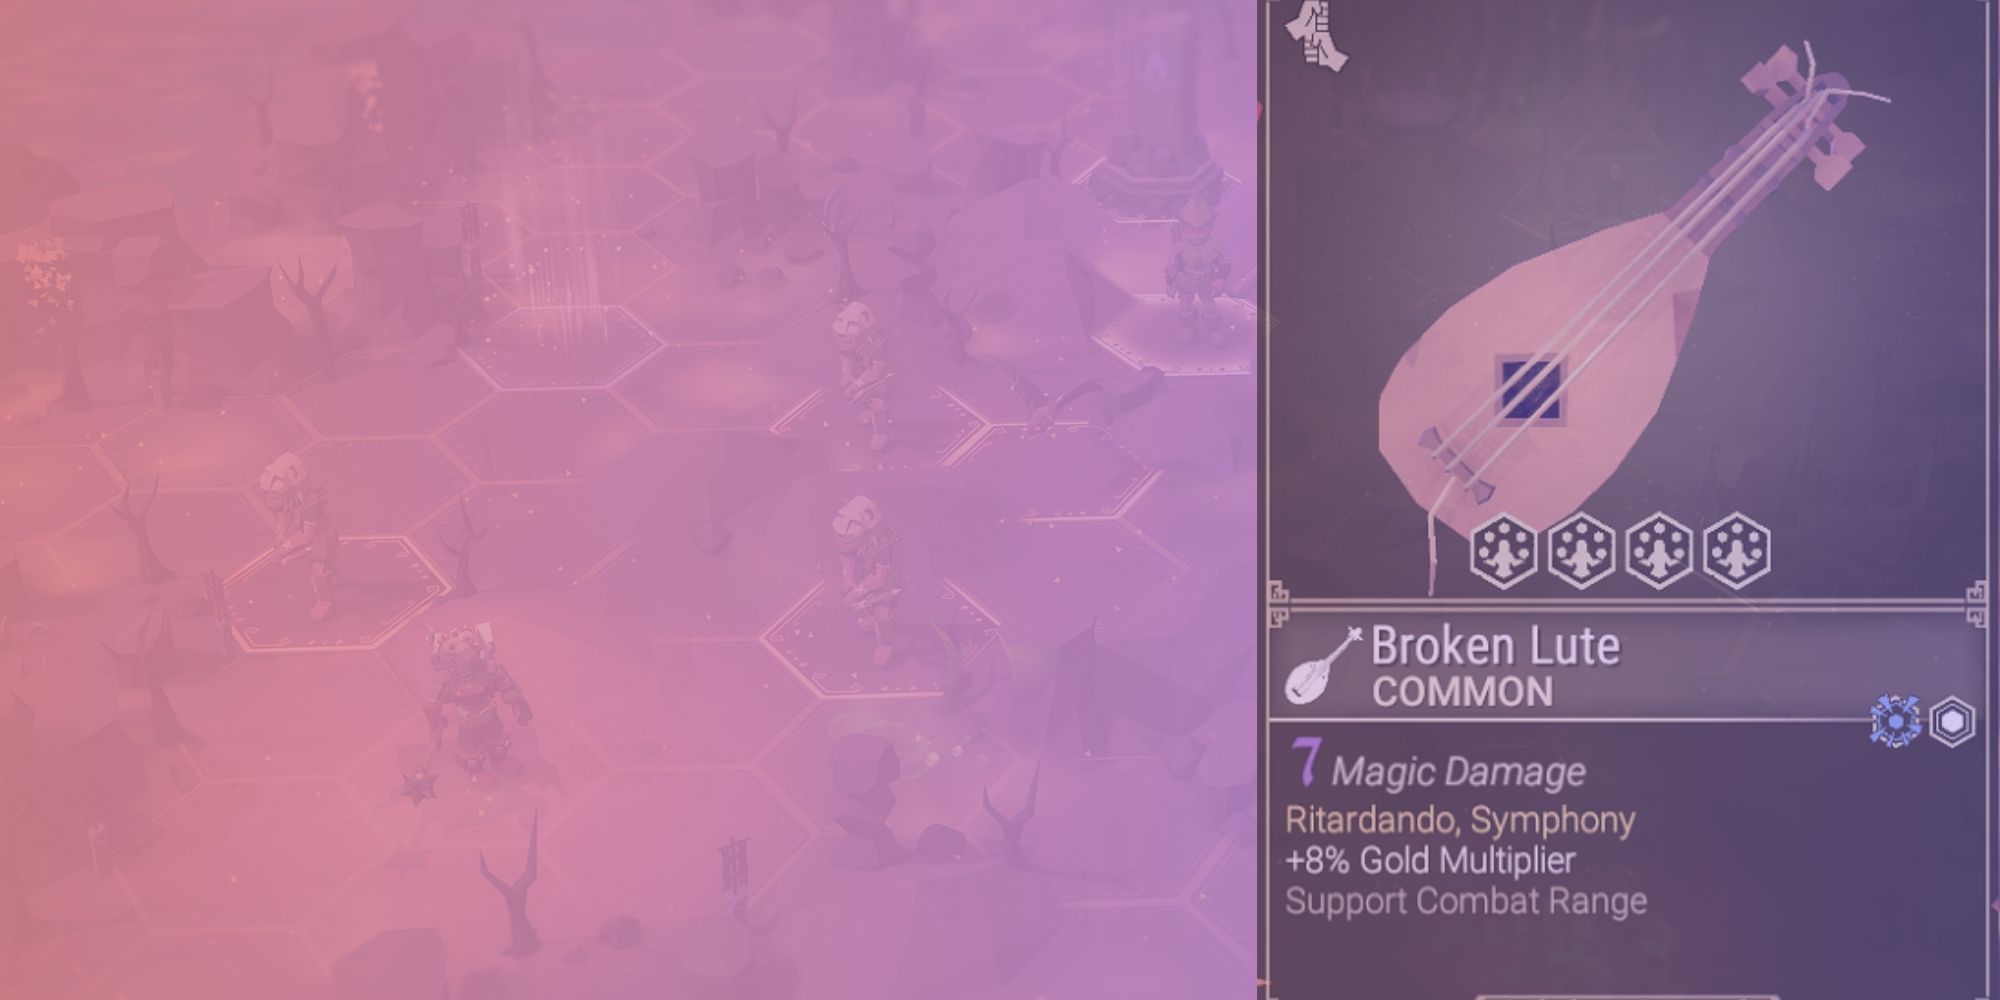 Brokrn lute stats over a pink and purple gradient background